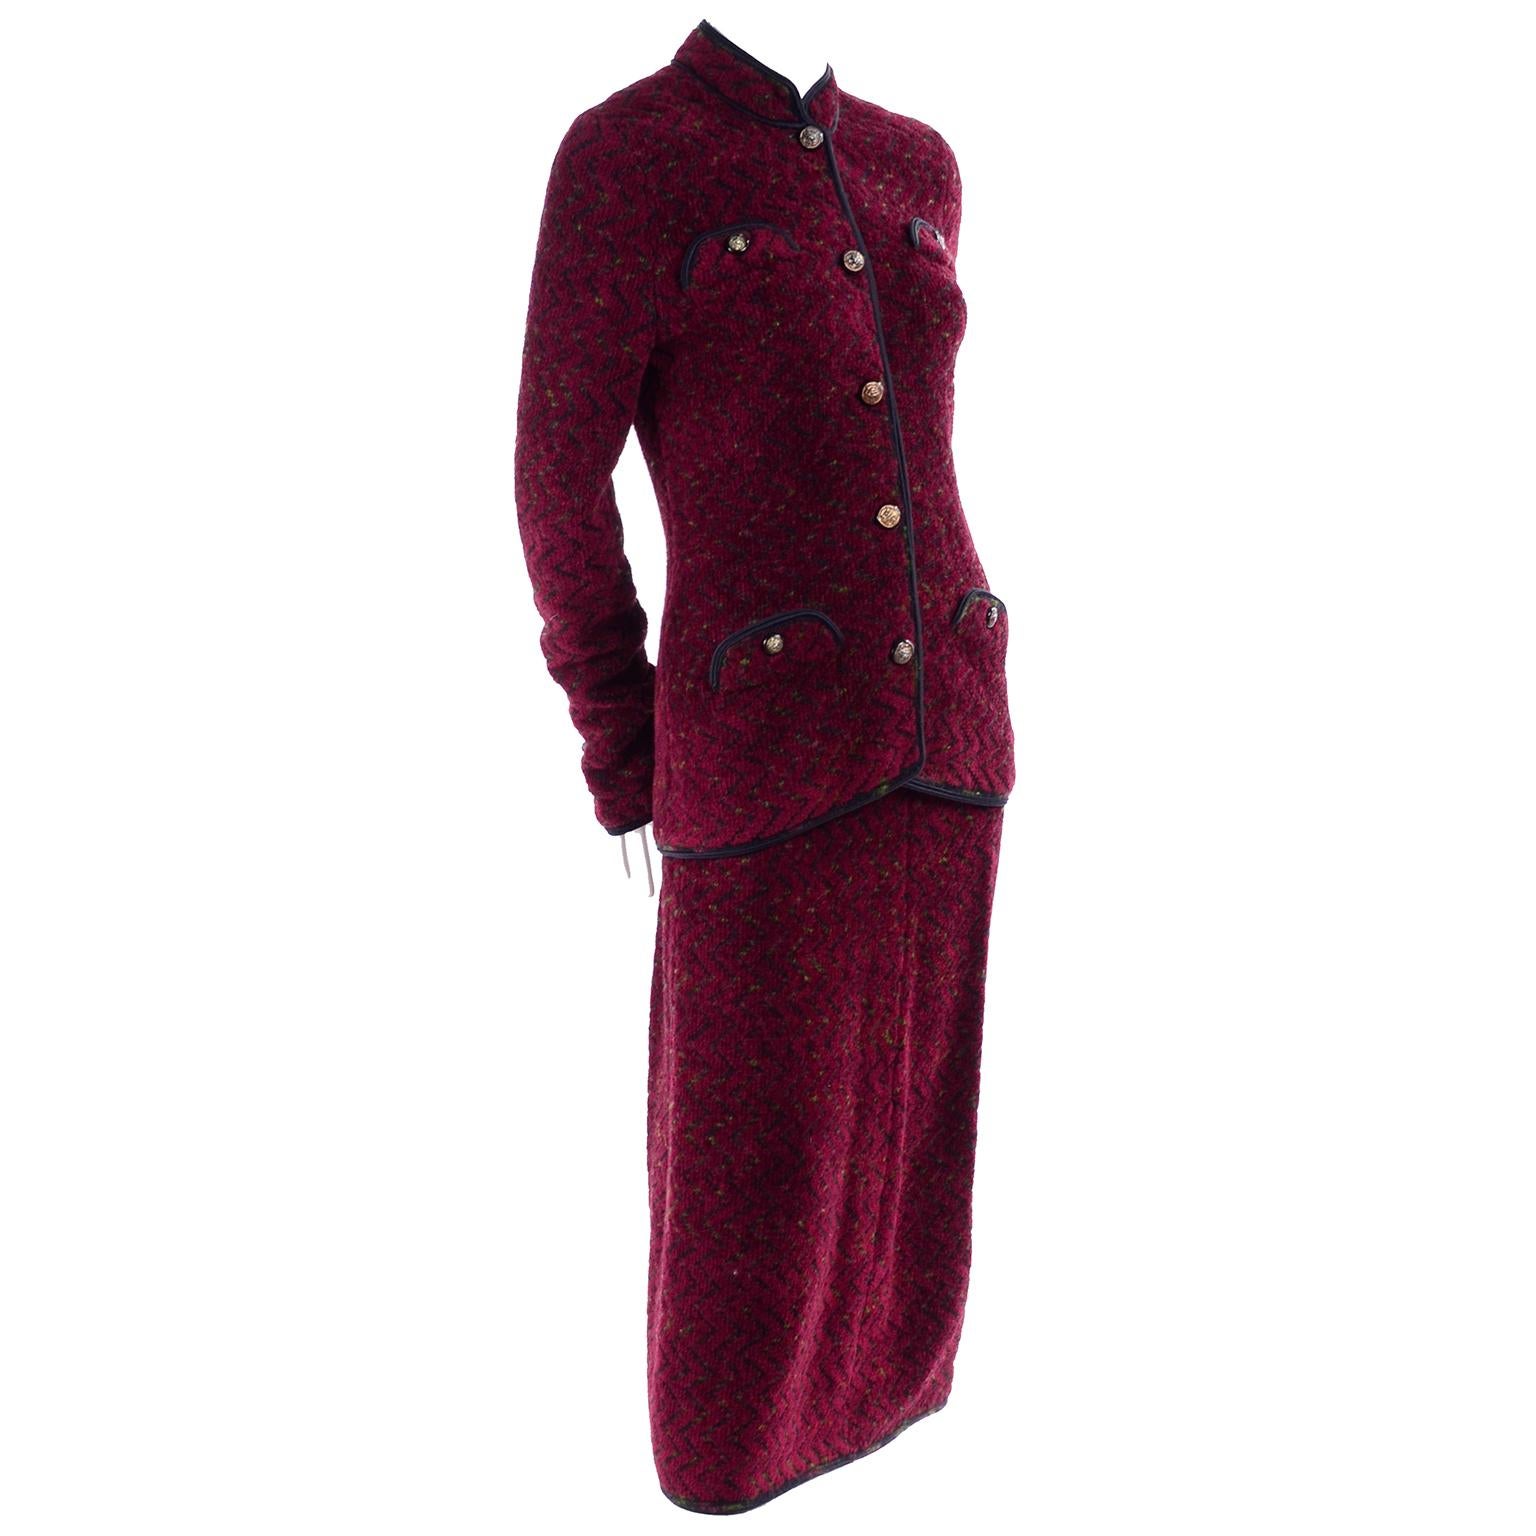 This is a very stylish Adolfo burgundy red skirt suit with a subtle black and green zig zag pattern in the gorgeous knit fabric with black trim. The long jacket has a mandarin collar and 4 decorative inverted flap pockets with lions head brass